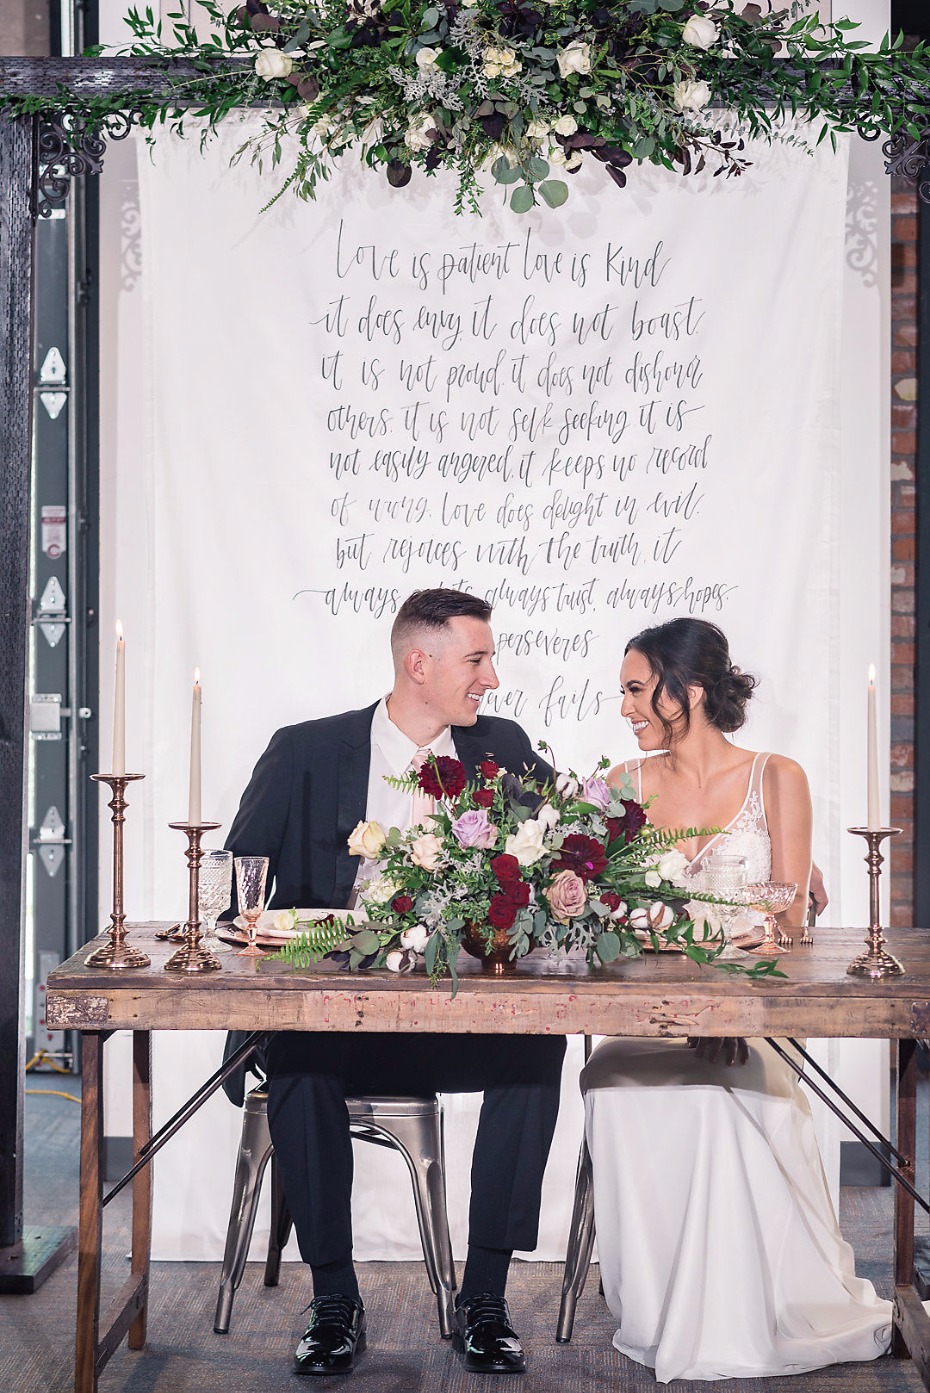 Gorgeous sweetheart table for two